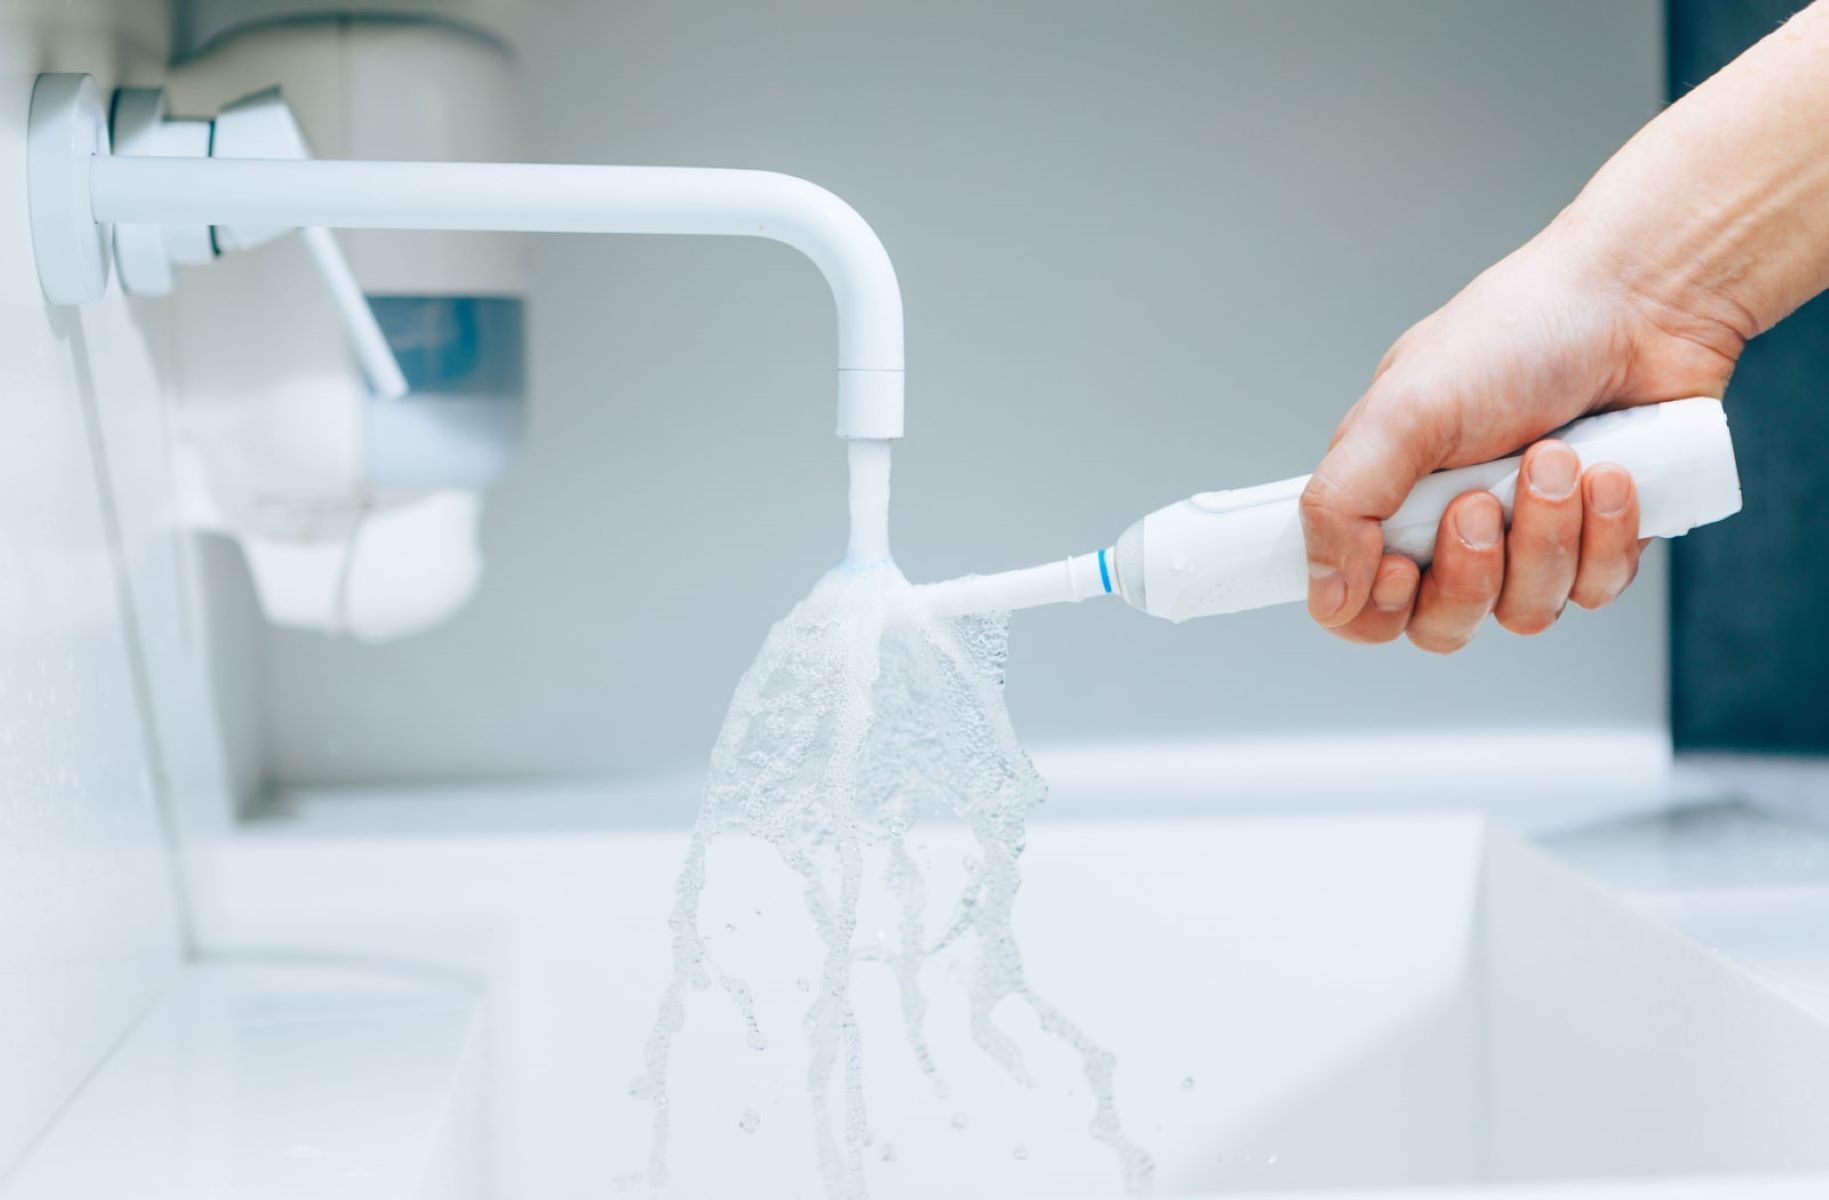 How To Disinfect A Toothbrush